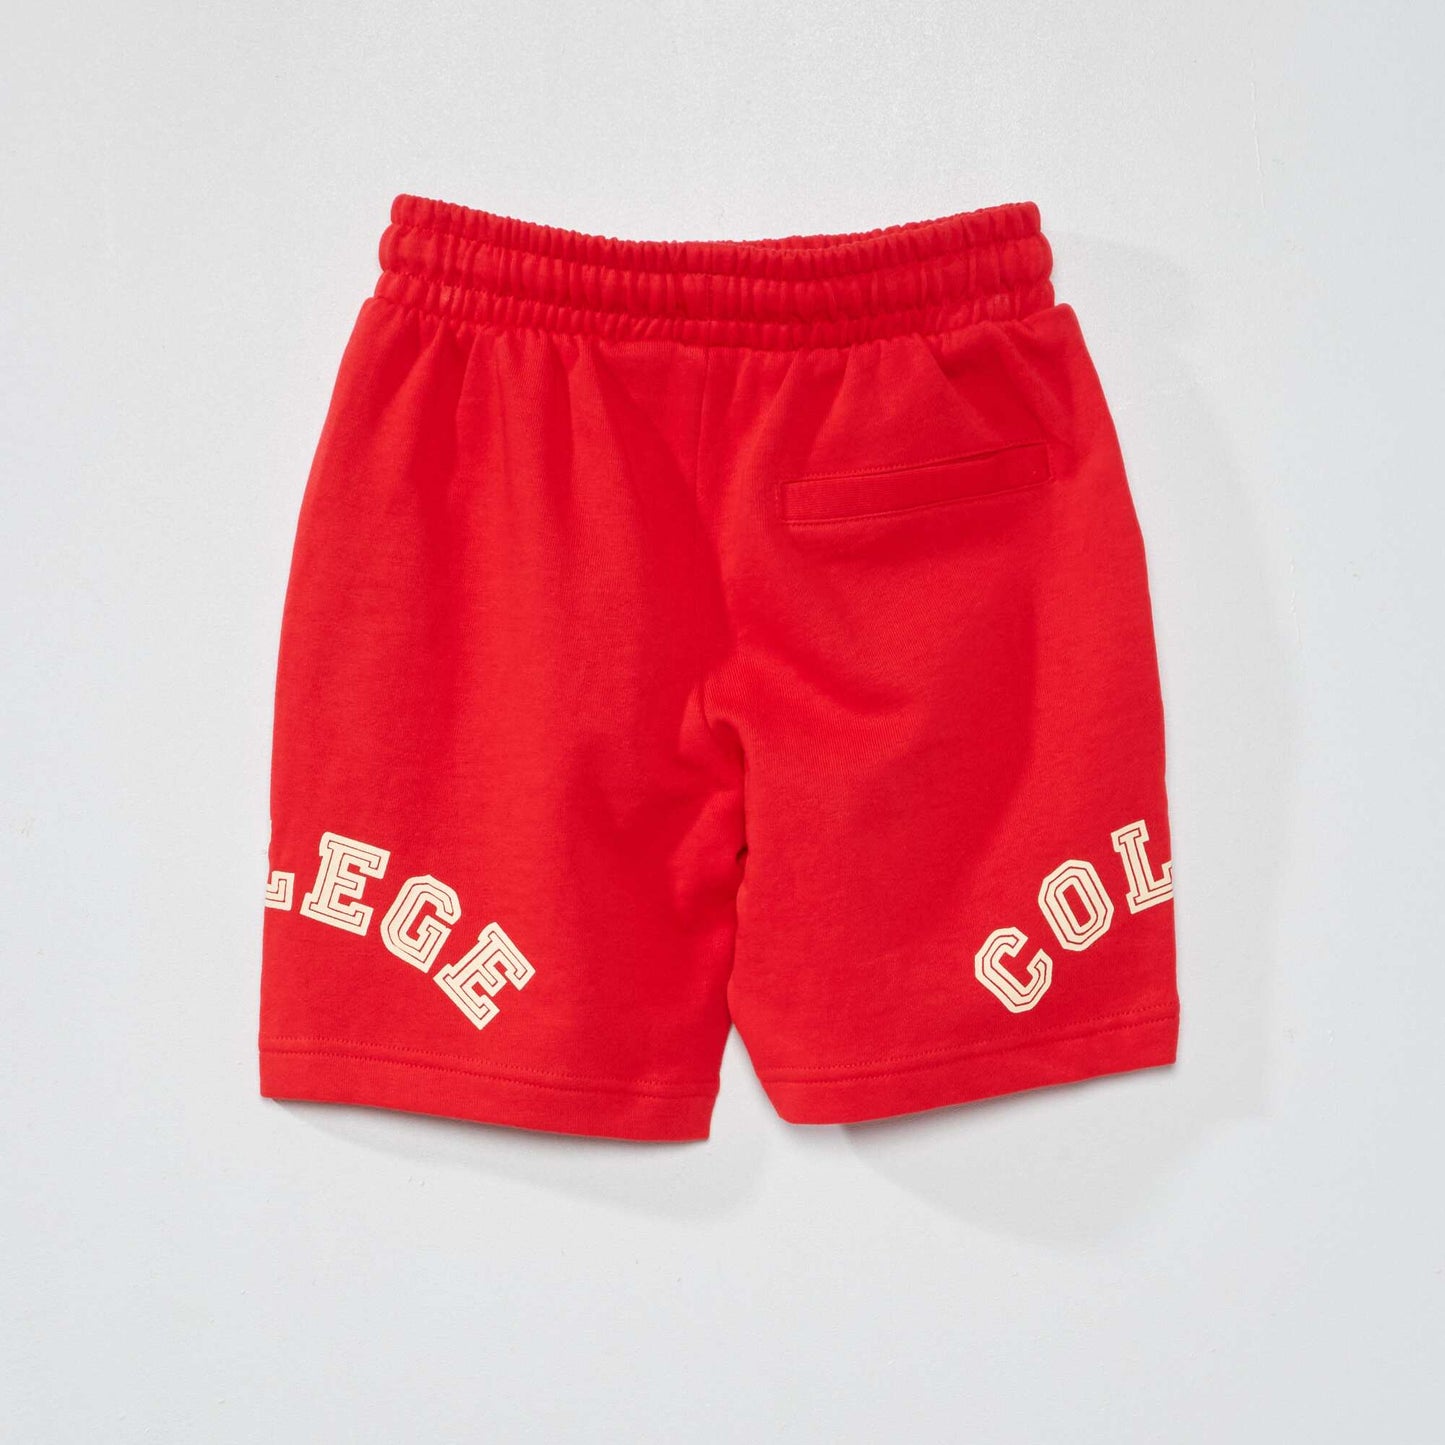 Cotton sports shorts REDCOLL